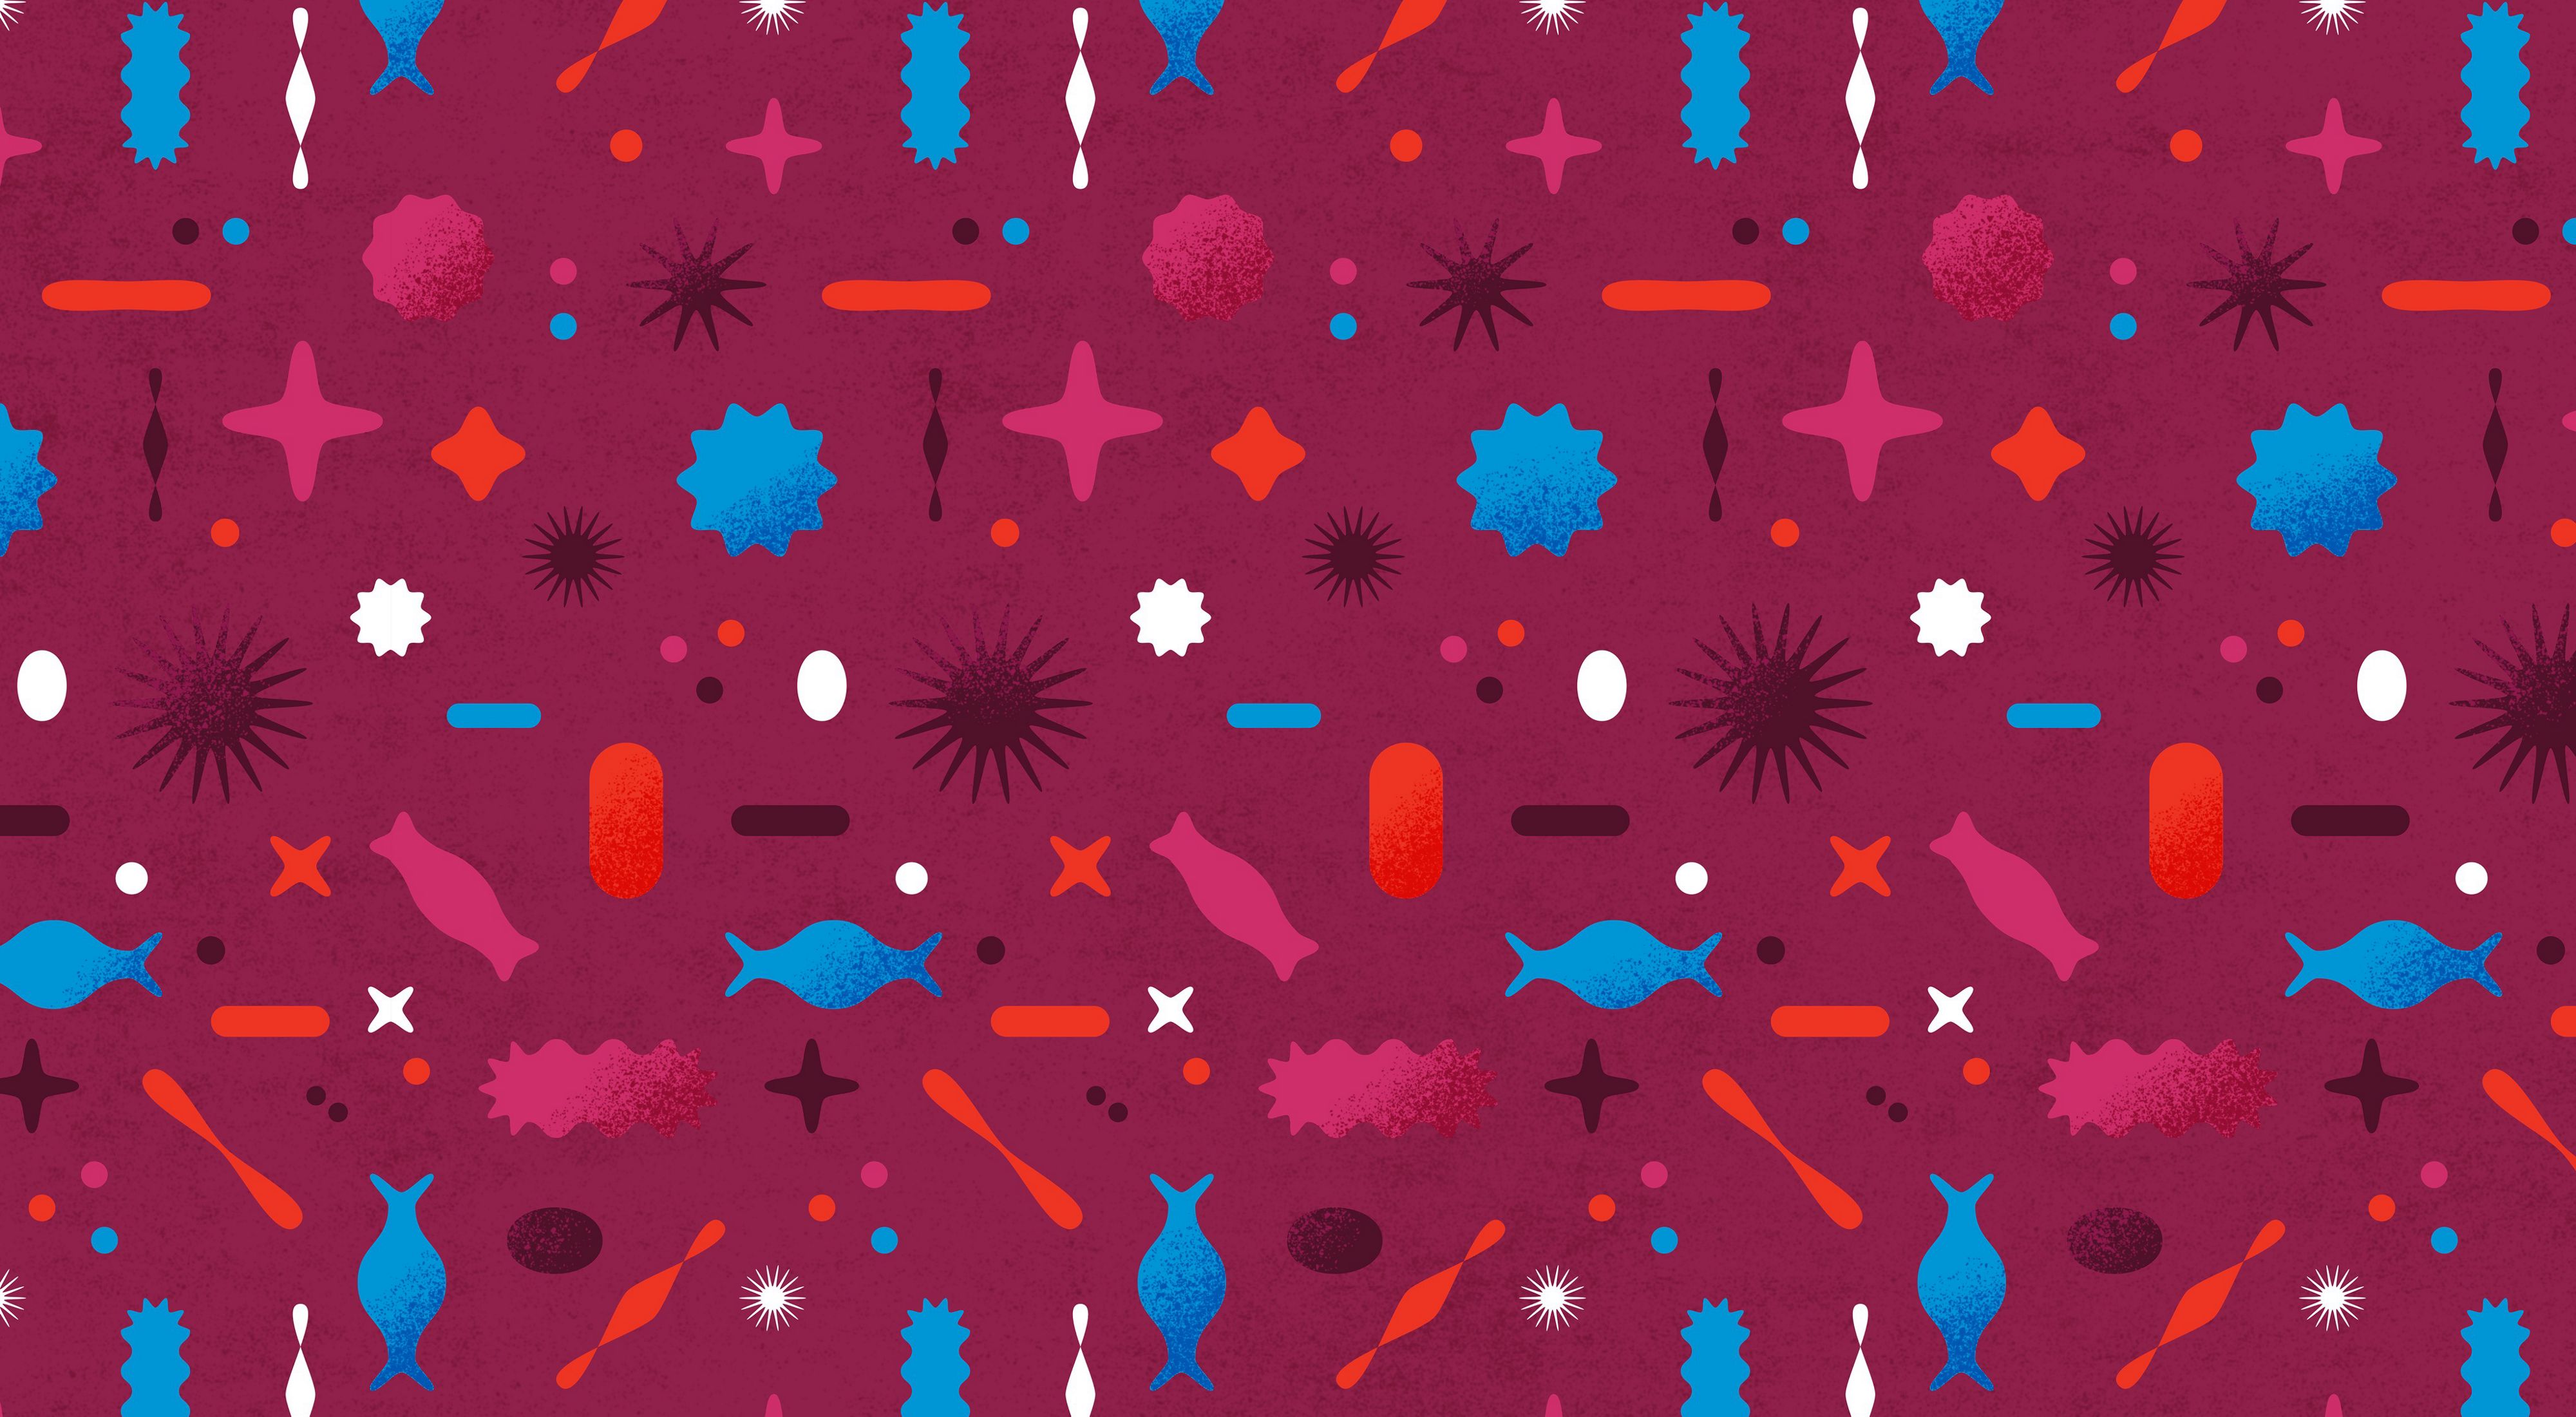 a pattern of abstract shapes representing microscopic organisms in reds, maroons, and blues